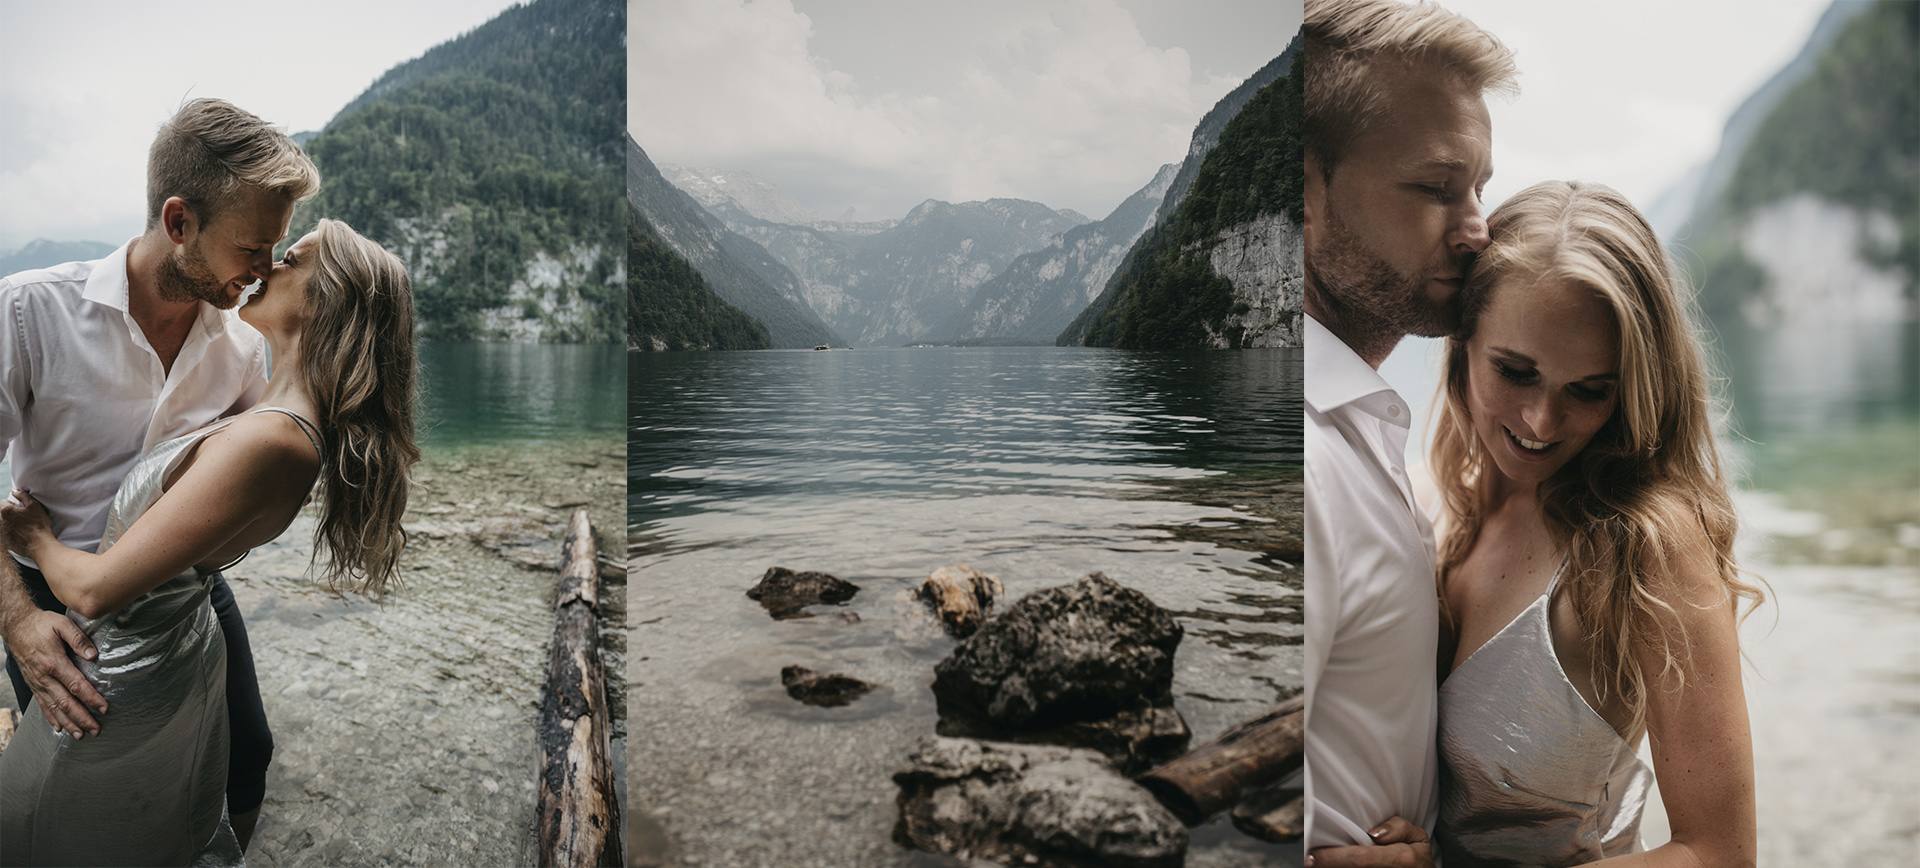 mountain couple photoshoot in germany at lake Königssee